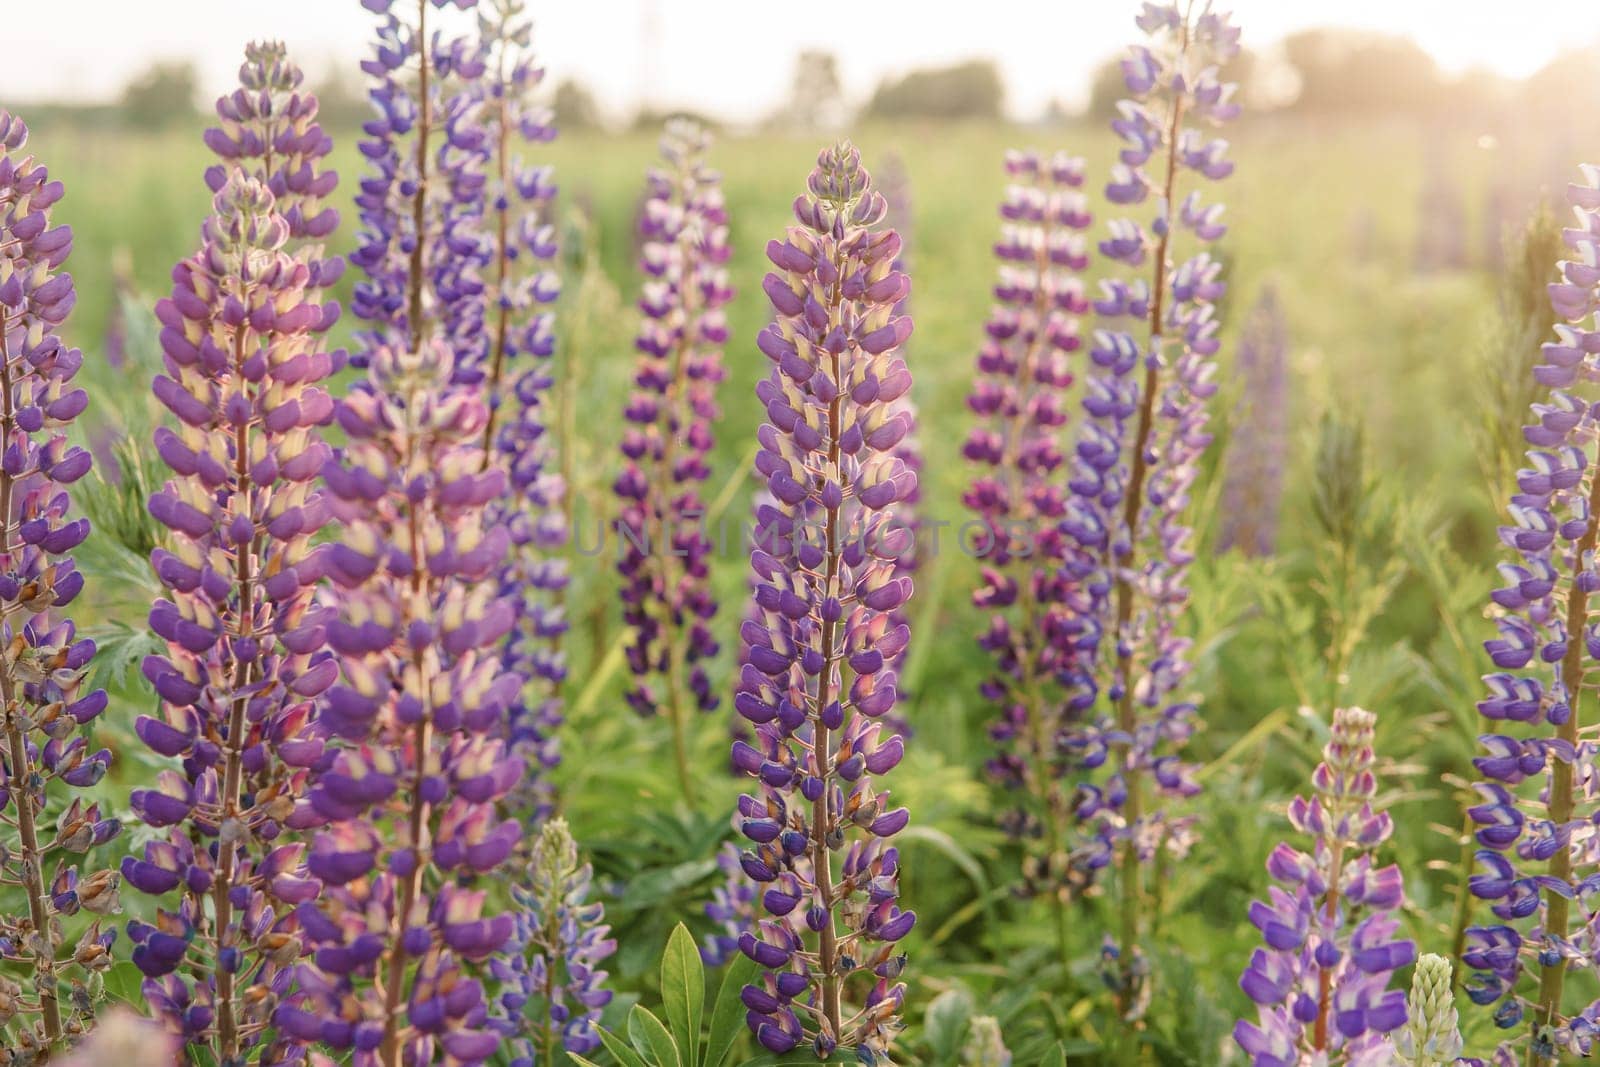 Bunch of violet blue lupine flowers in a summer meadow background.